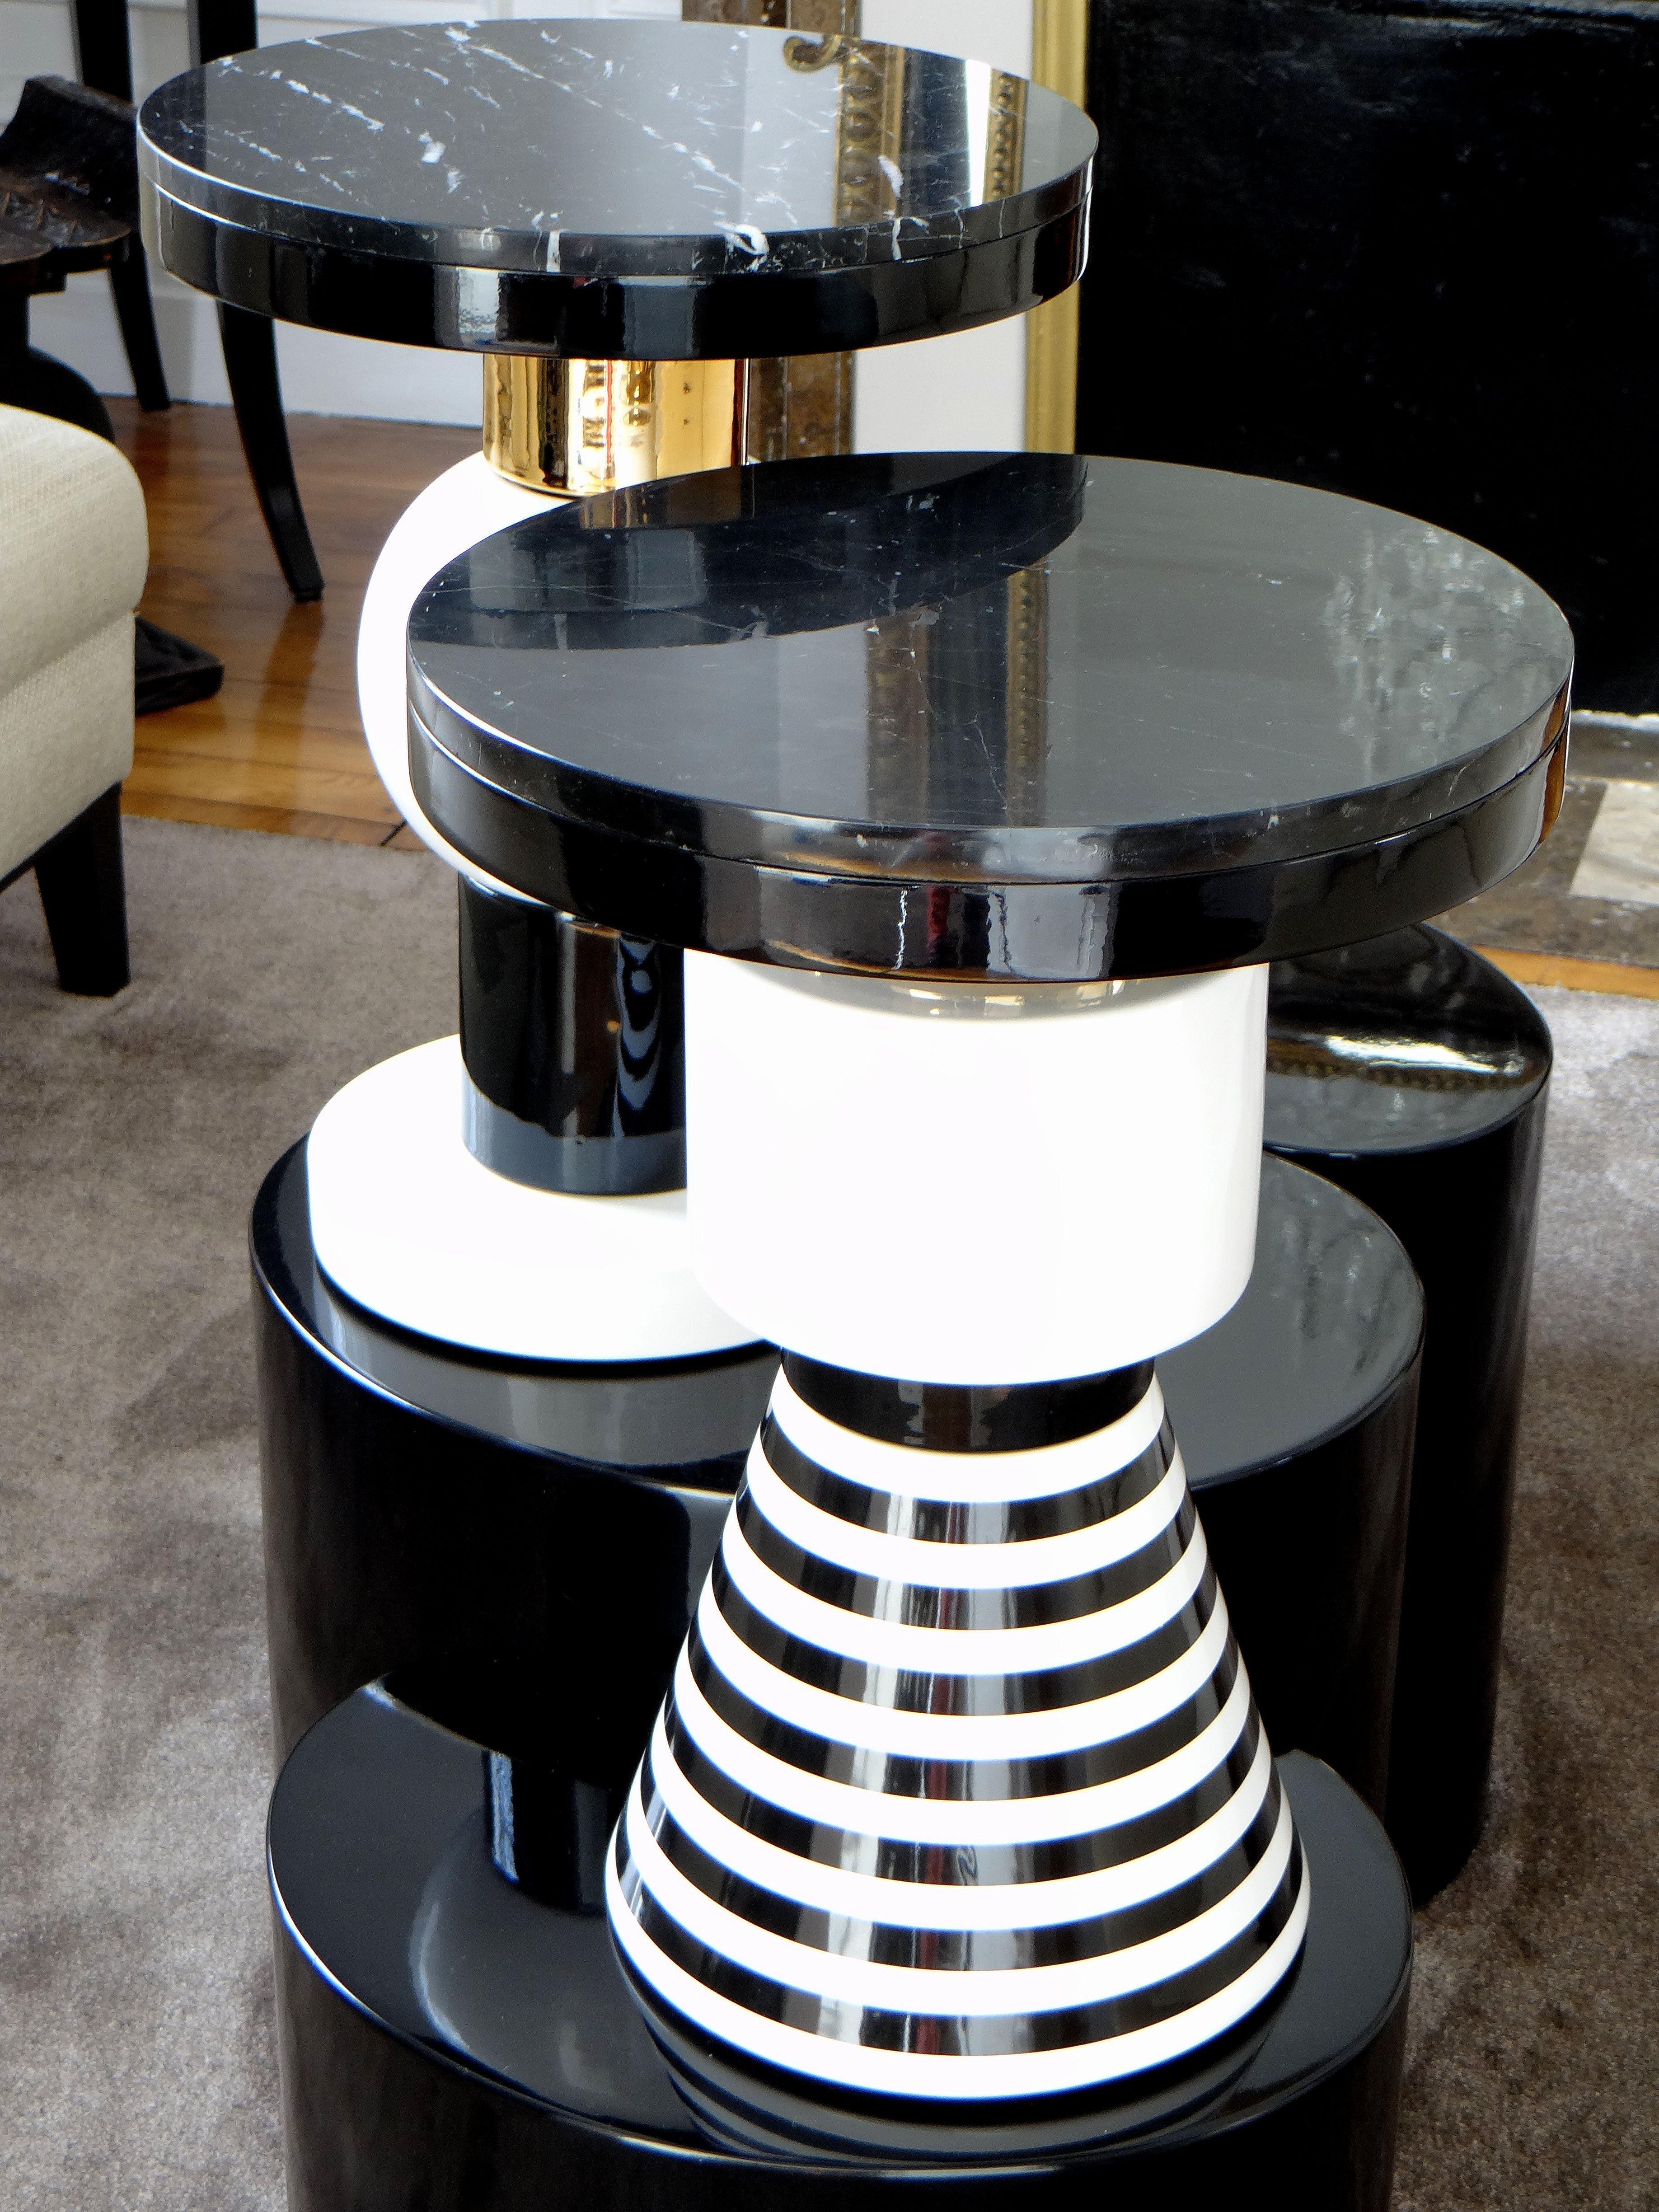 Pair of Table or Pedestal Table, Contemporary Creation on Ceramic, 2018 6